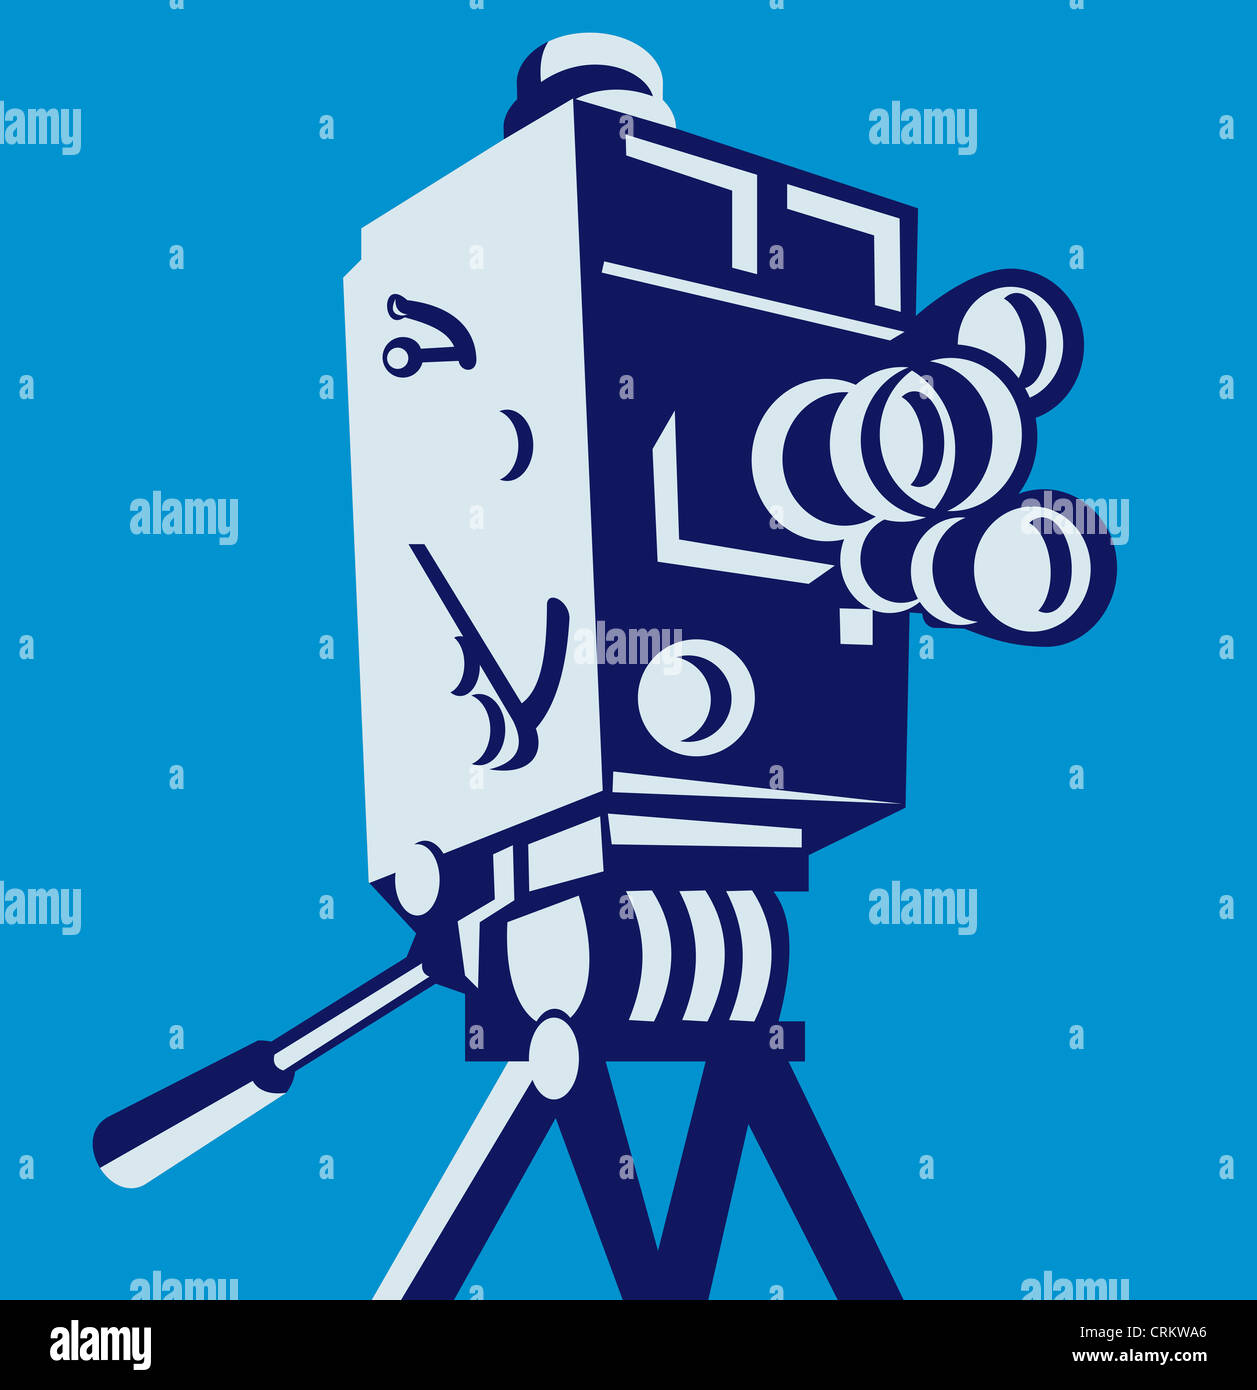 Illustration of a vintage film movie video camera viewed from low angle set inside square done in retro style. Stock Photo